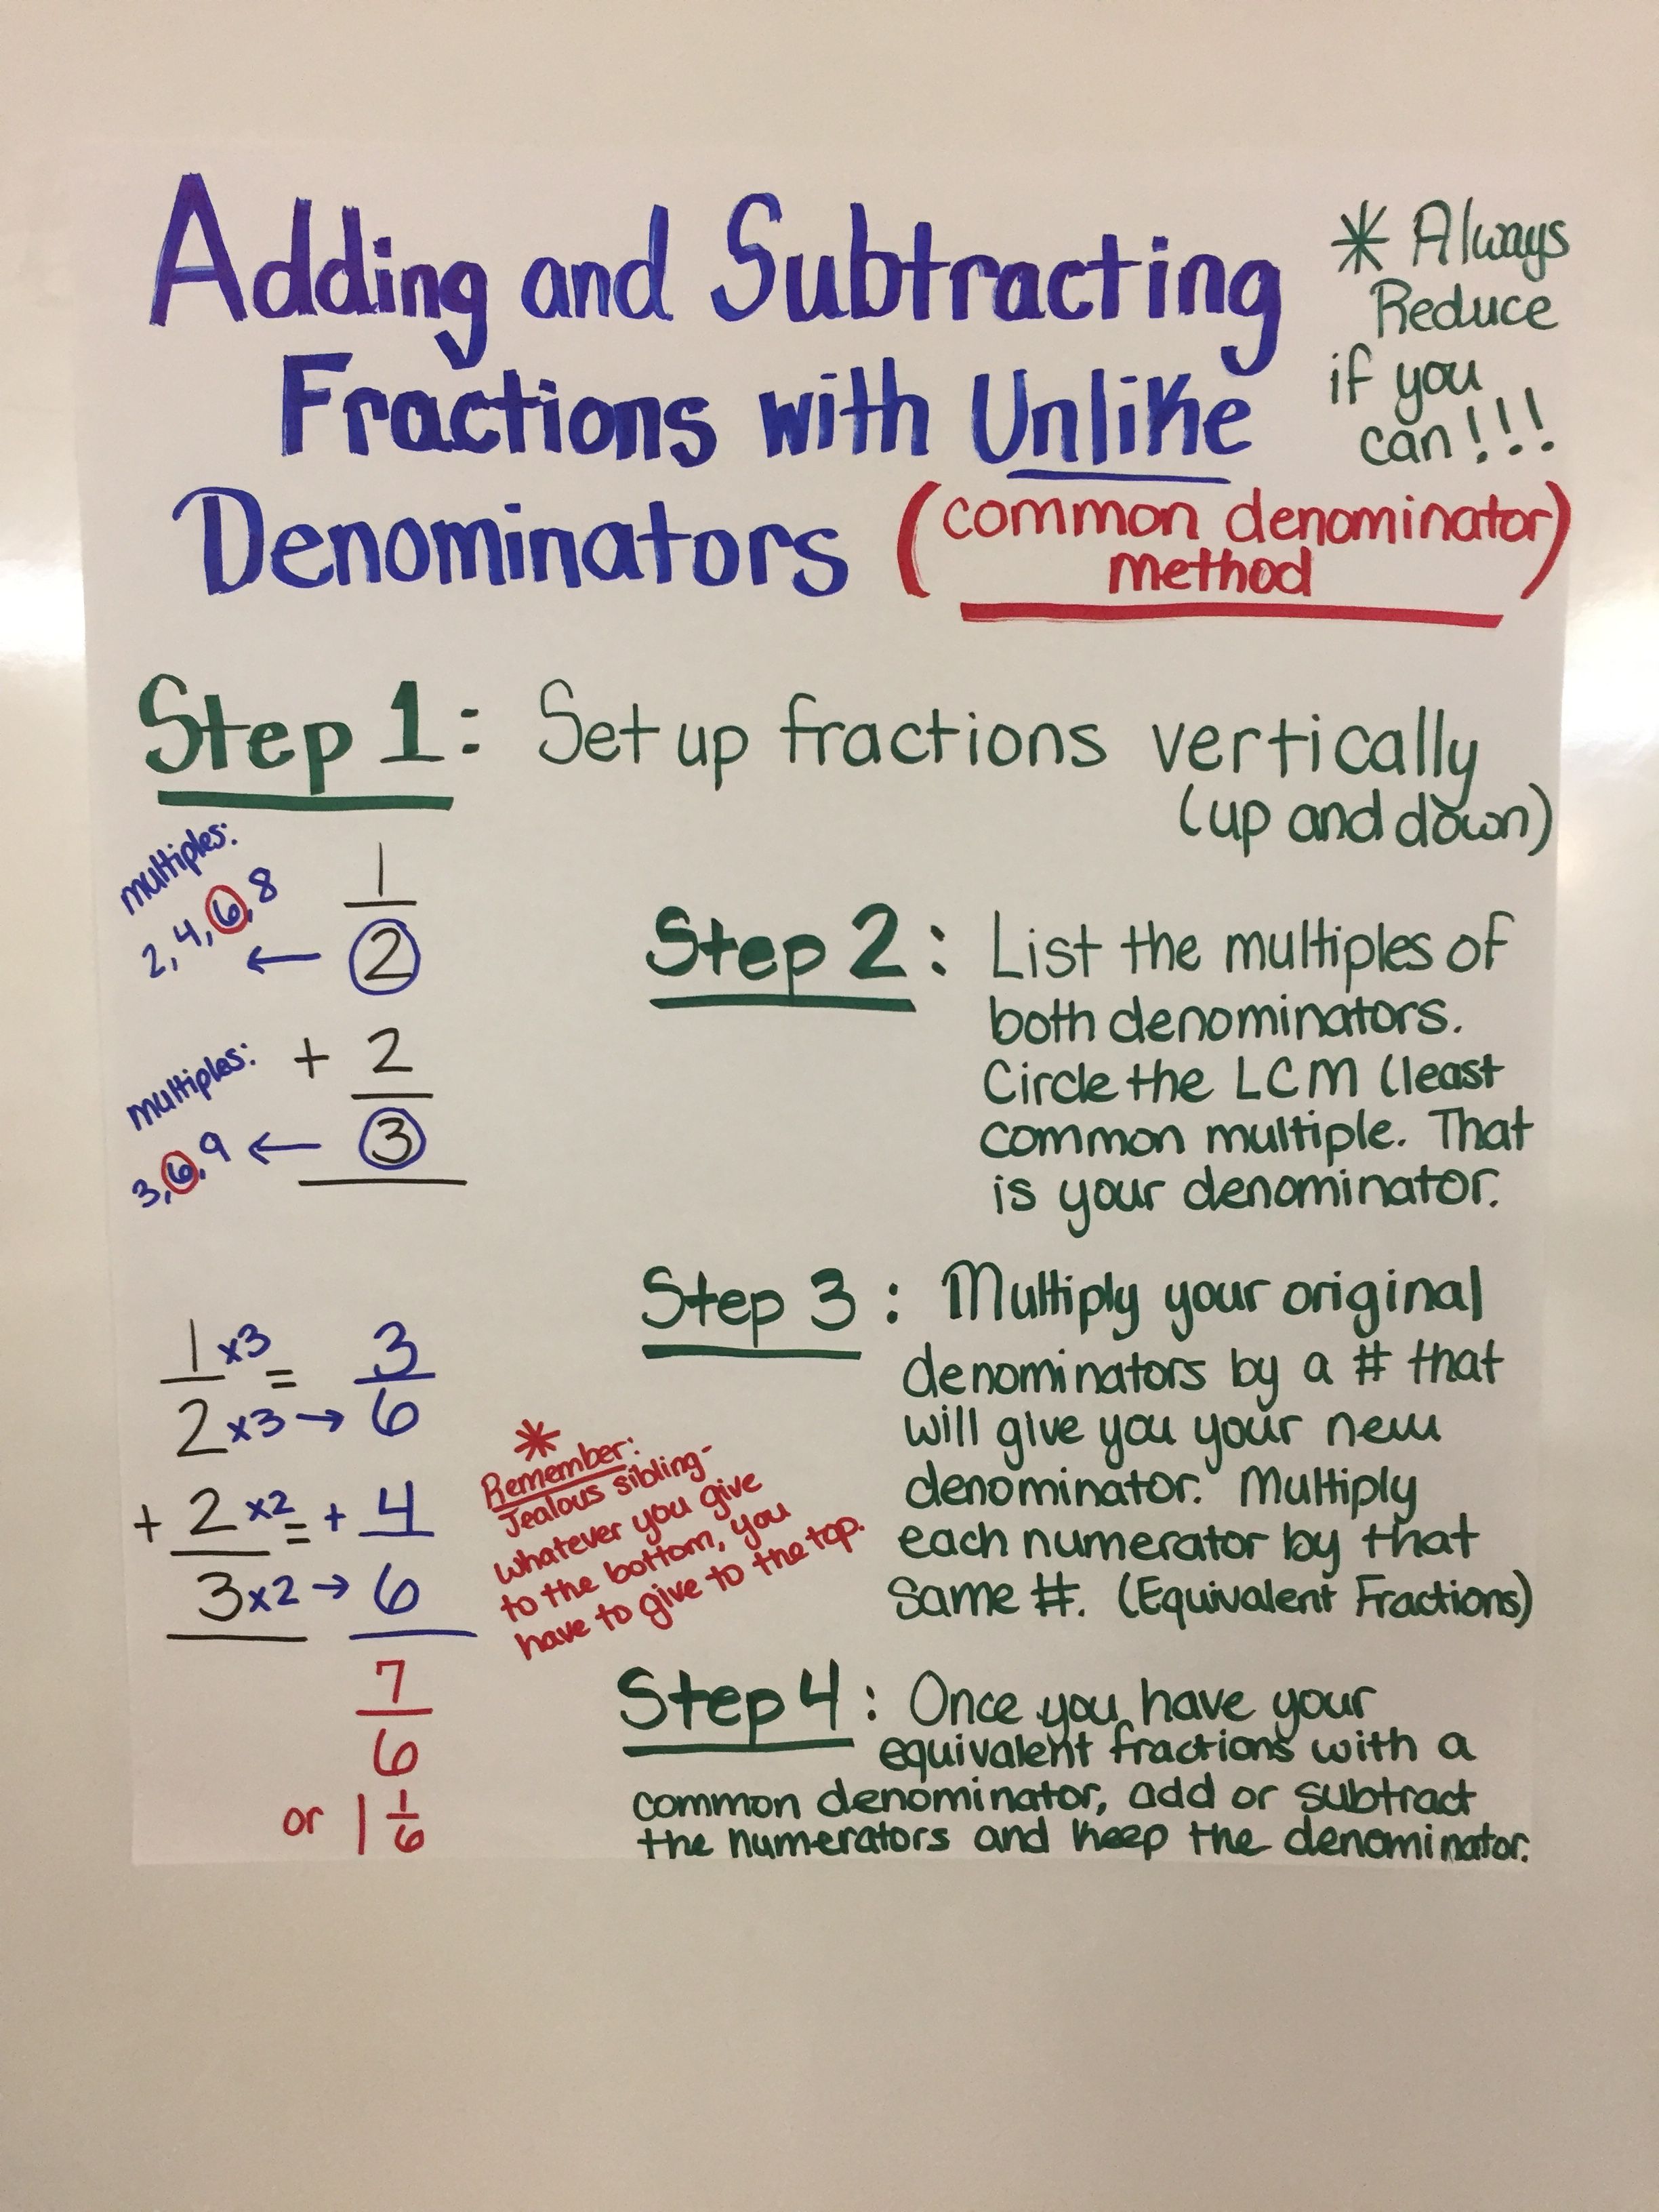 adding and subtracting fractions.jpg